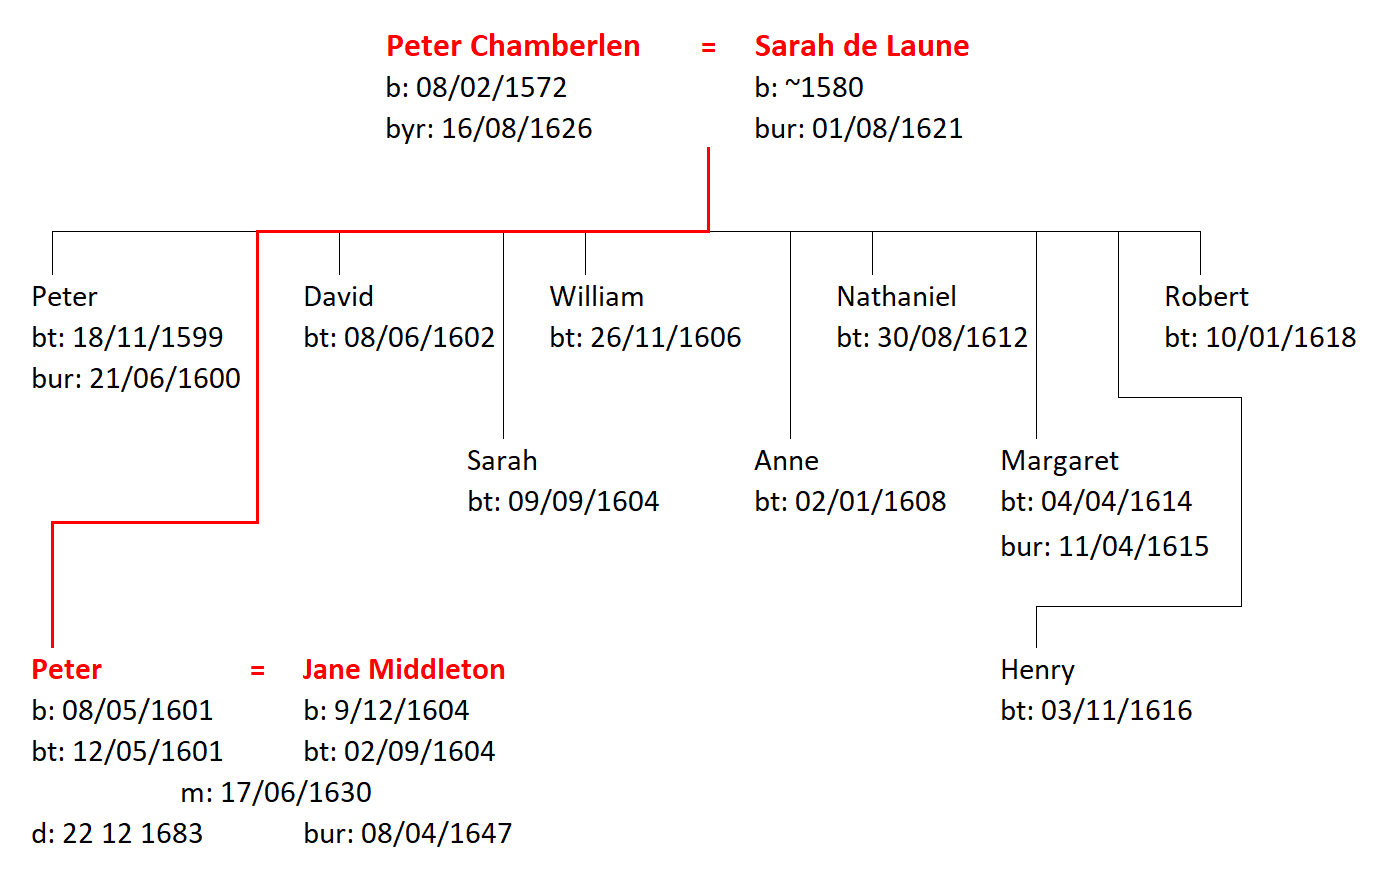 Figure 2: The Family of Peter and Sarah Chamberlen